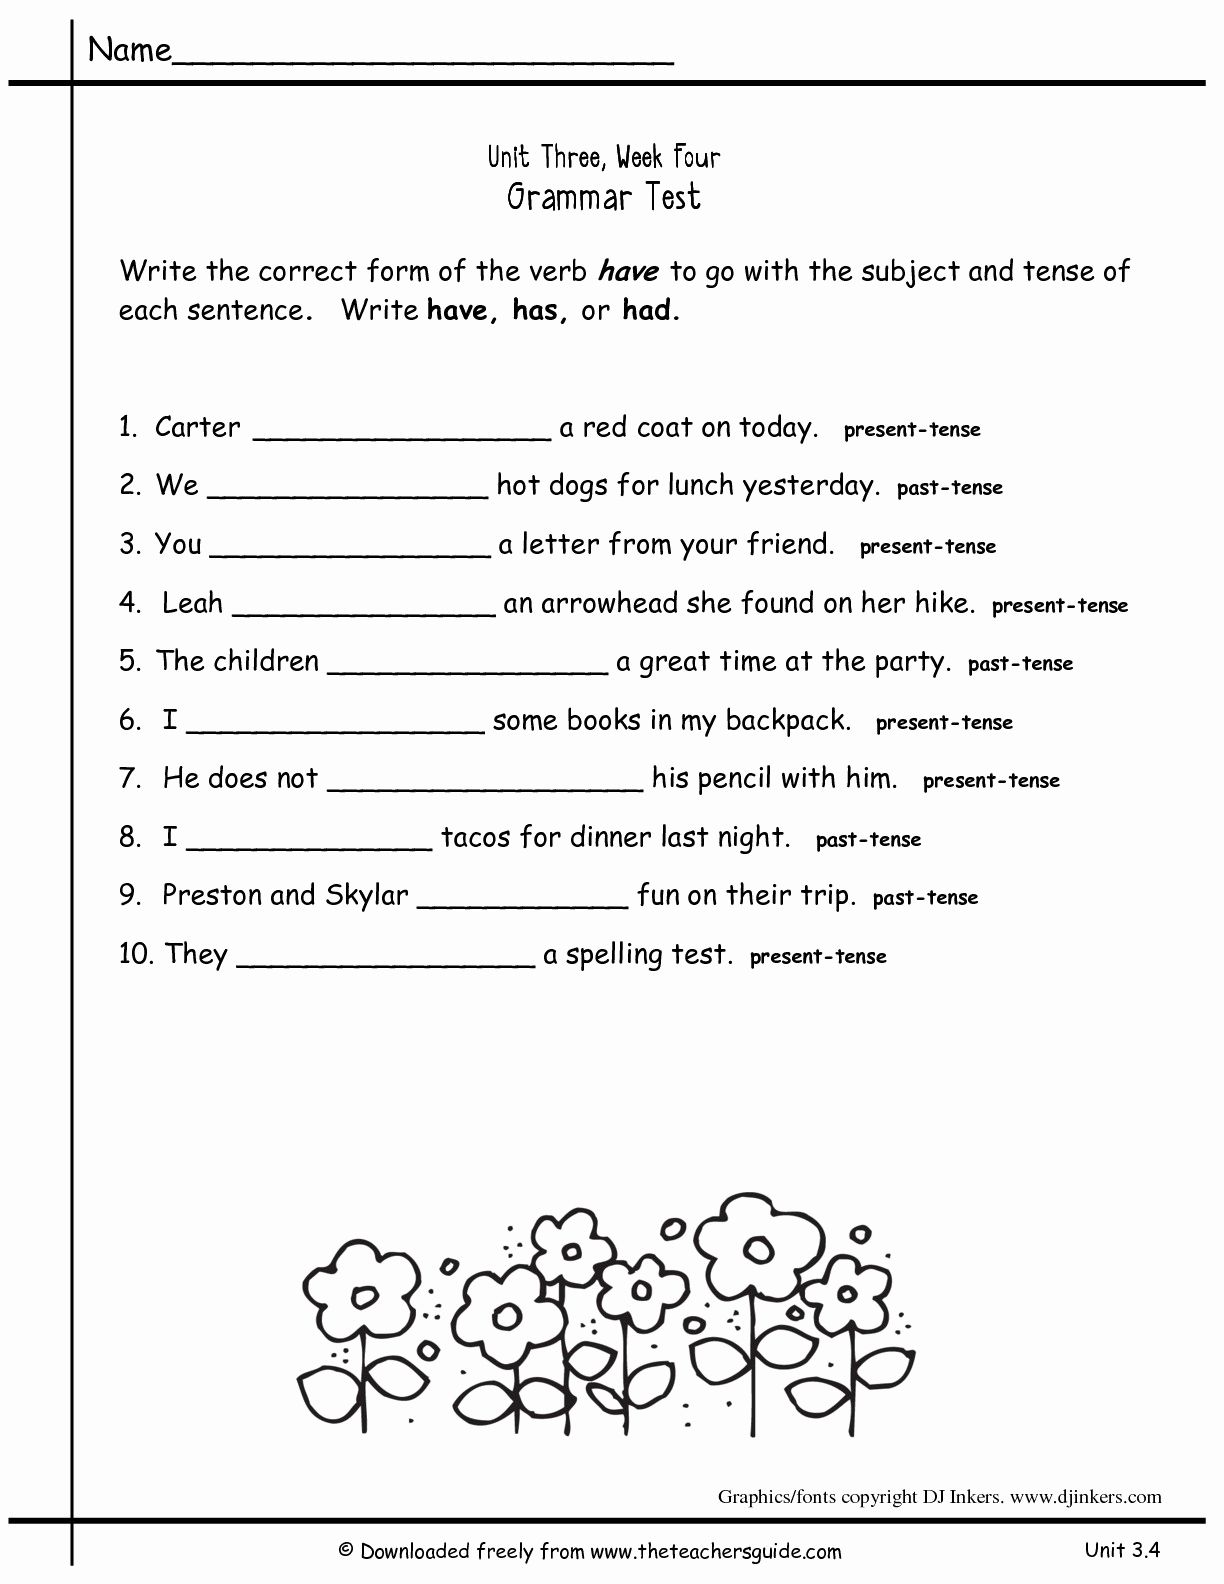 english-worksheets-for-year-1-uk-free-english-worksheets-for-year-1